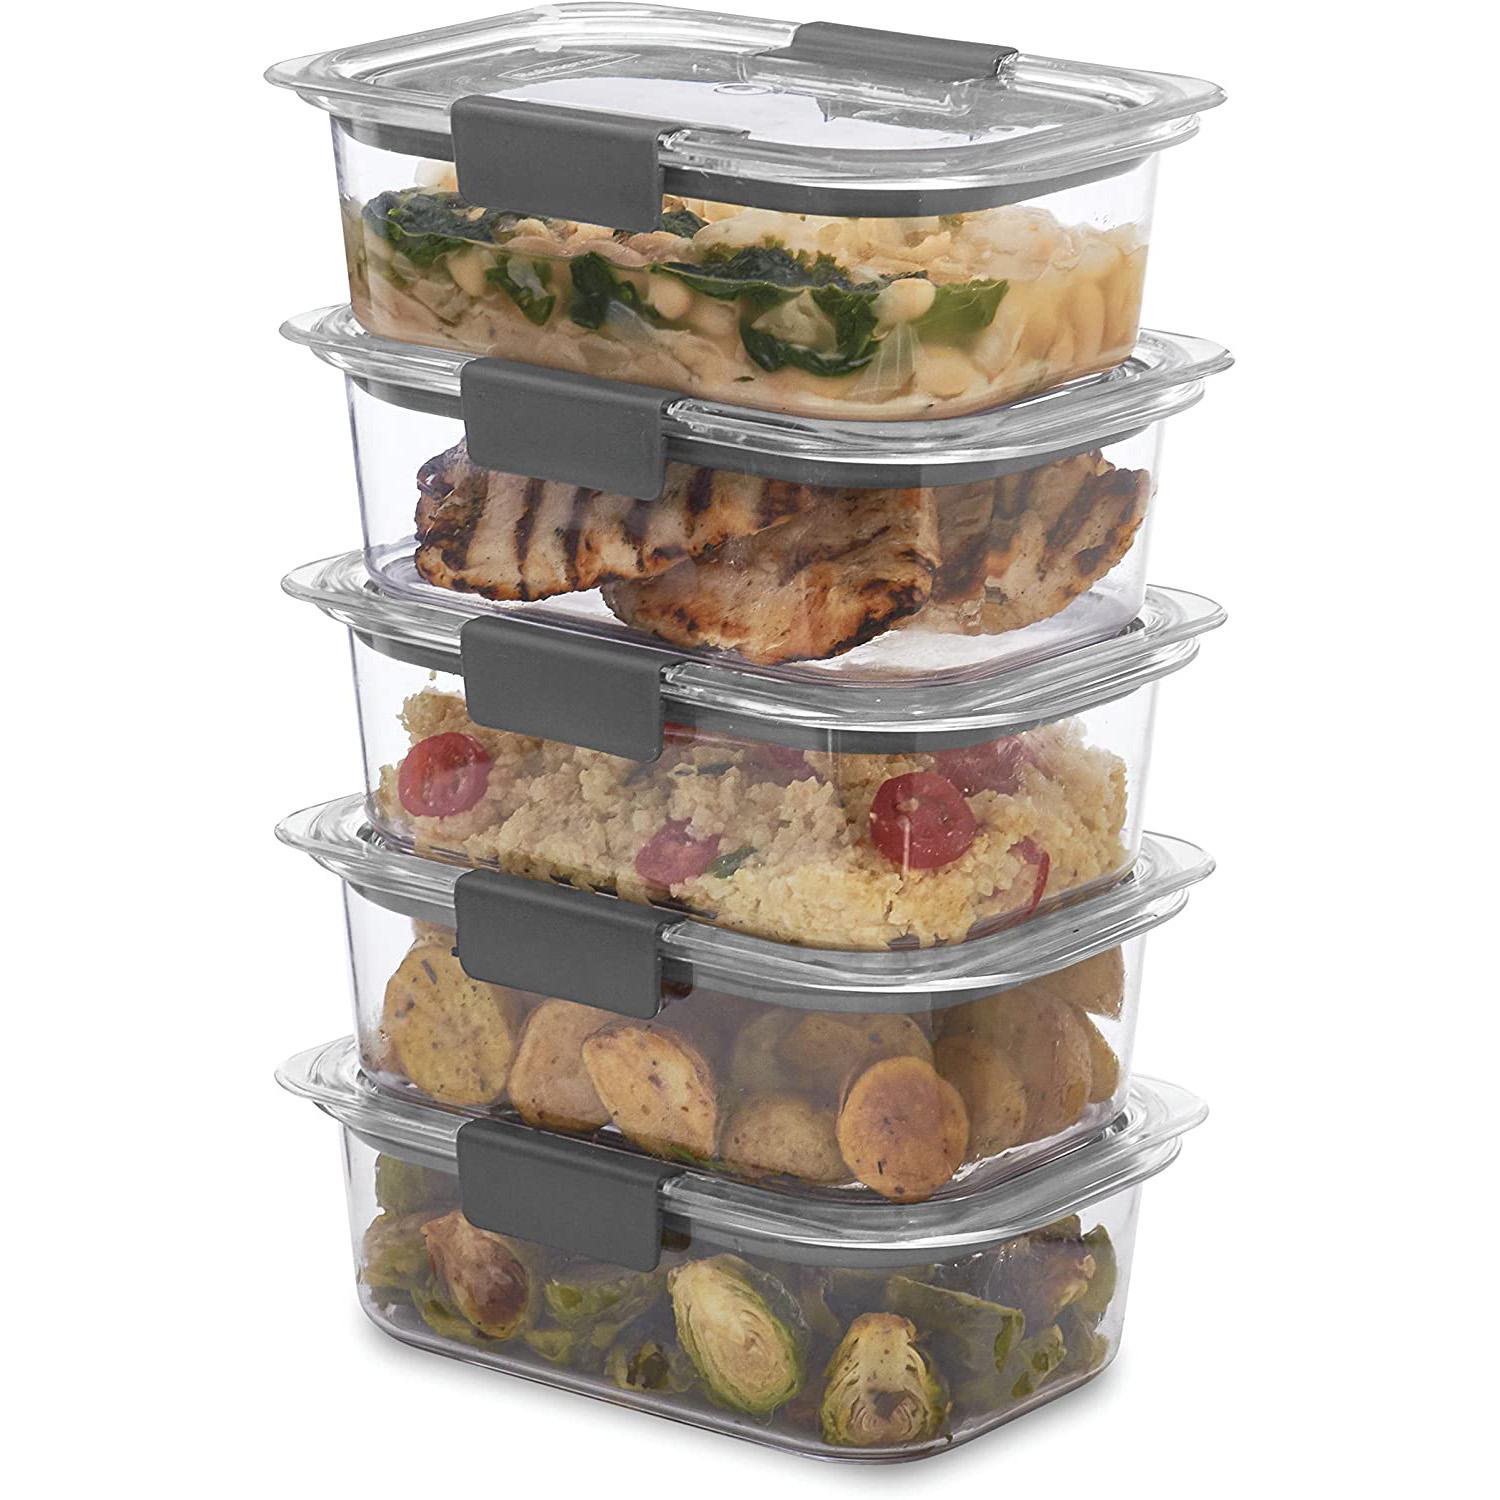 5 Rubbermaid Brilliance Food Storage Containers for $18.93